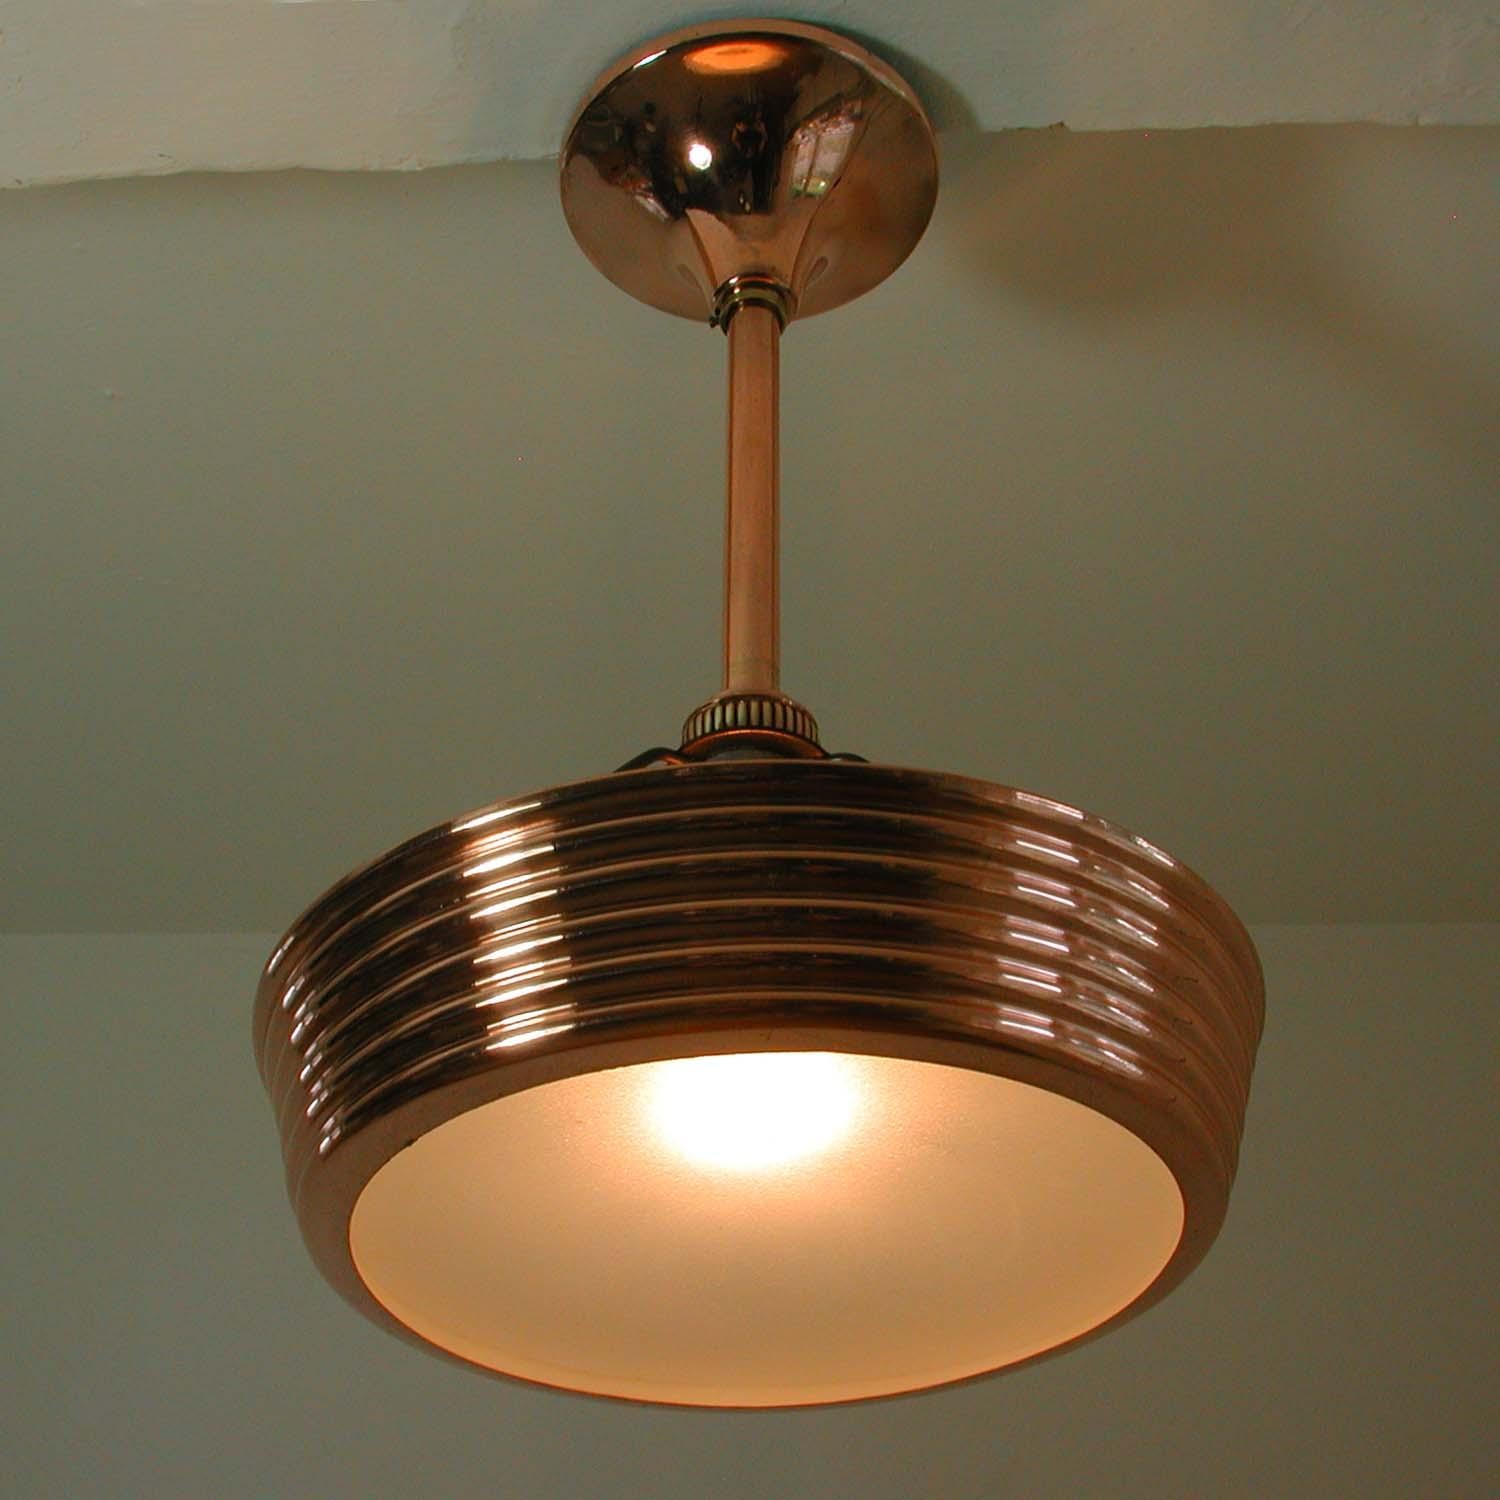 French Art Deco Copper and Satin Glass Flush Mount Pendant, 1930s For Sale 4